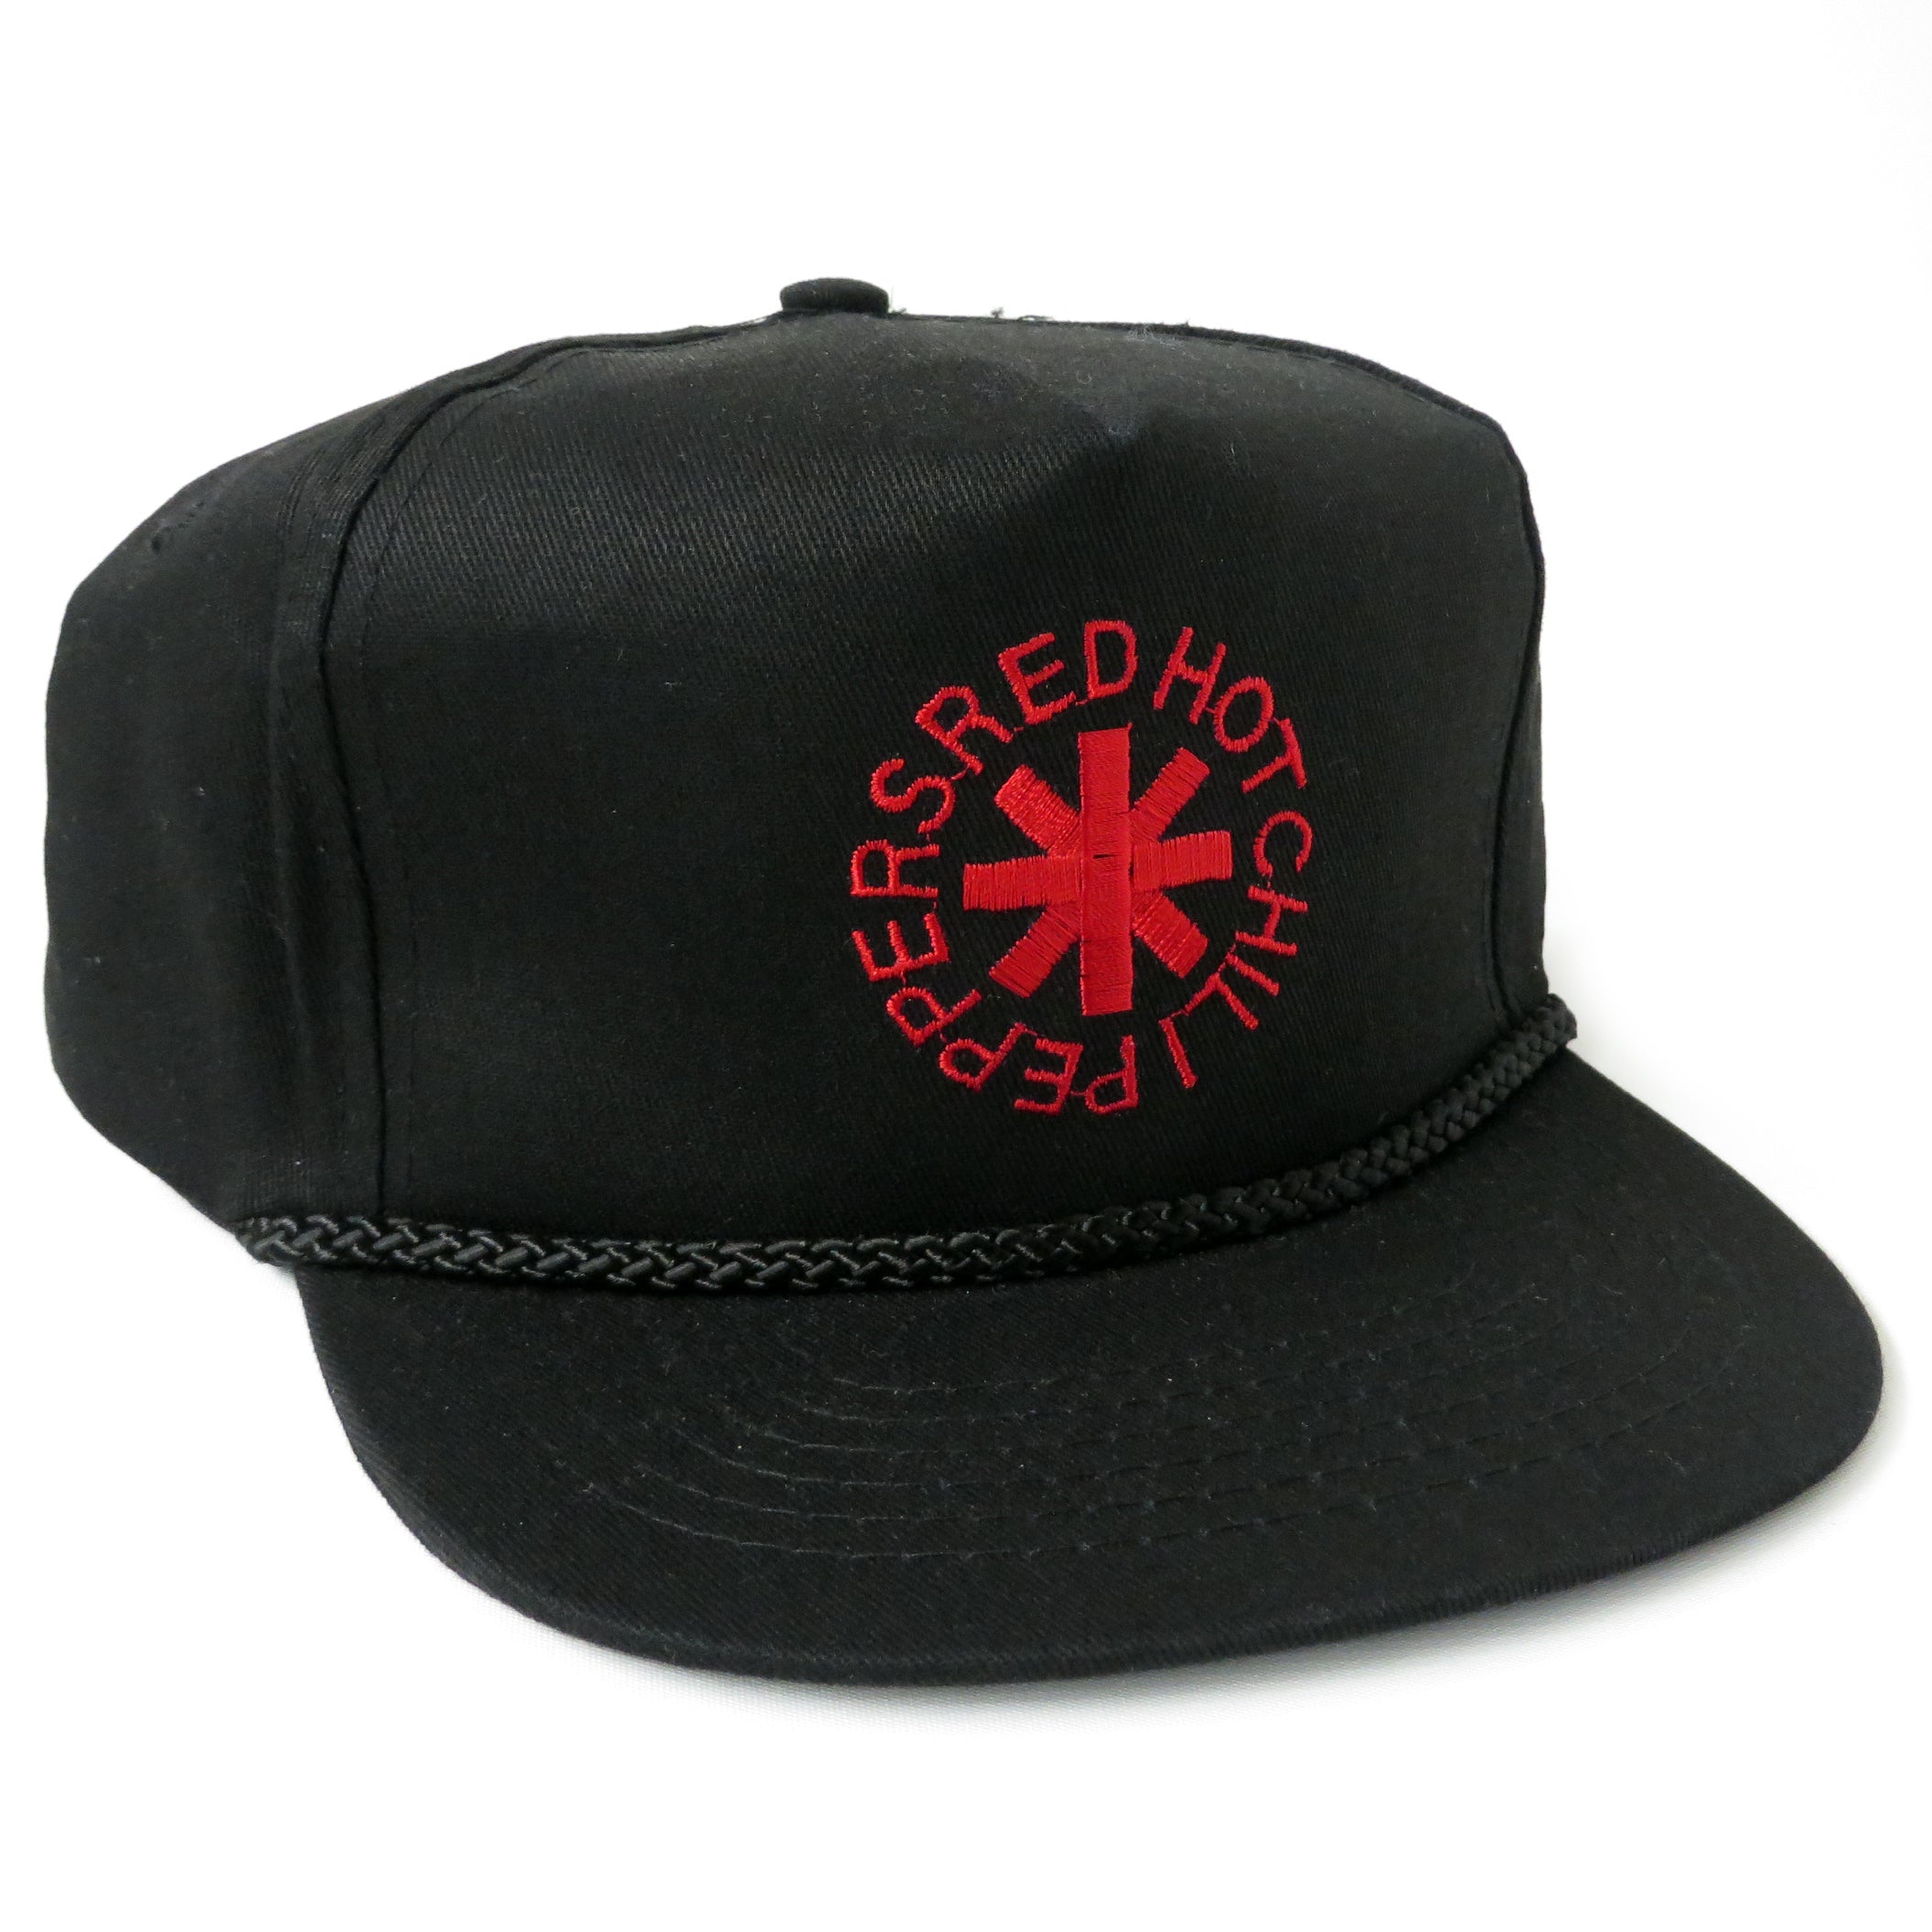 Vintage Red Hot Chili Peppers Snapback Hat